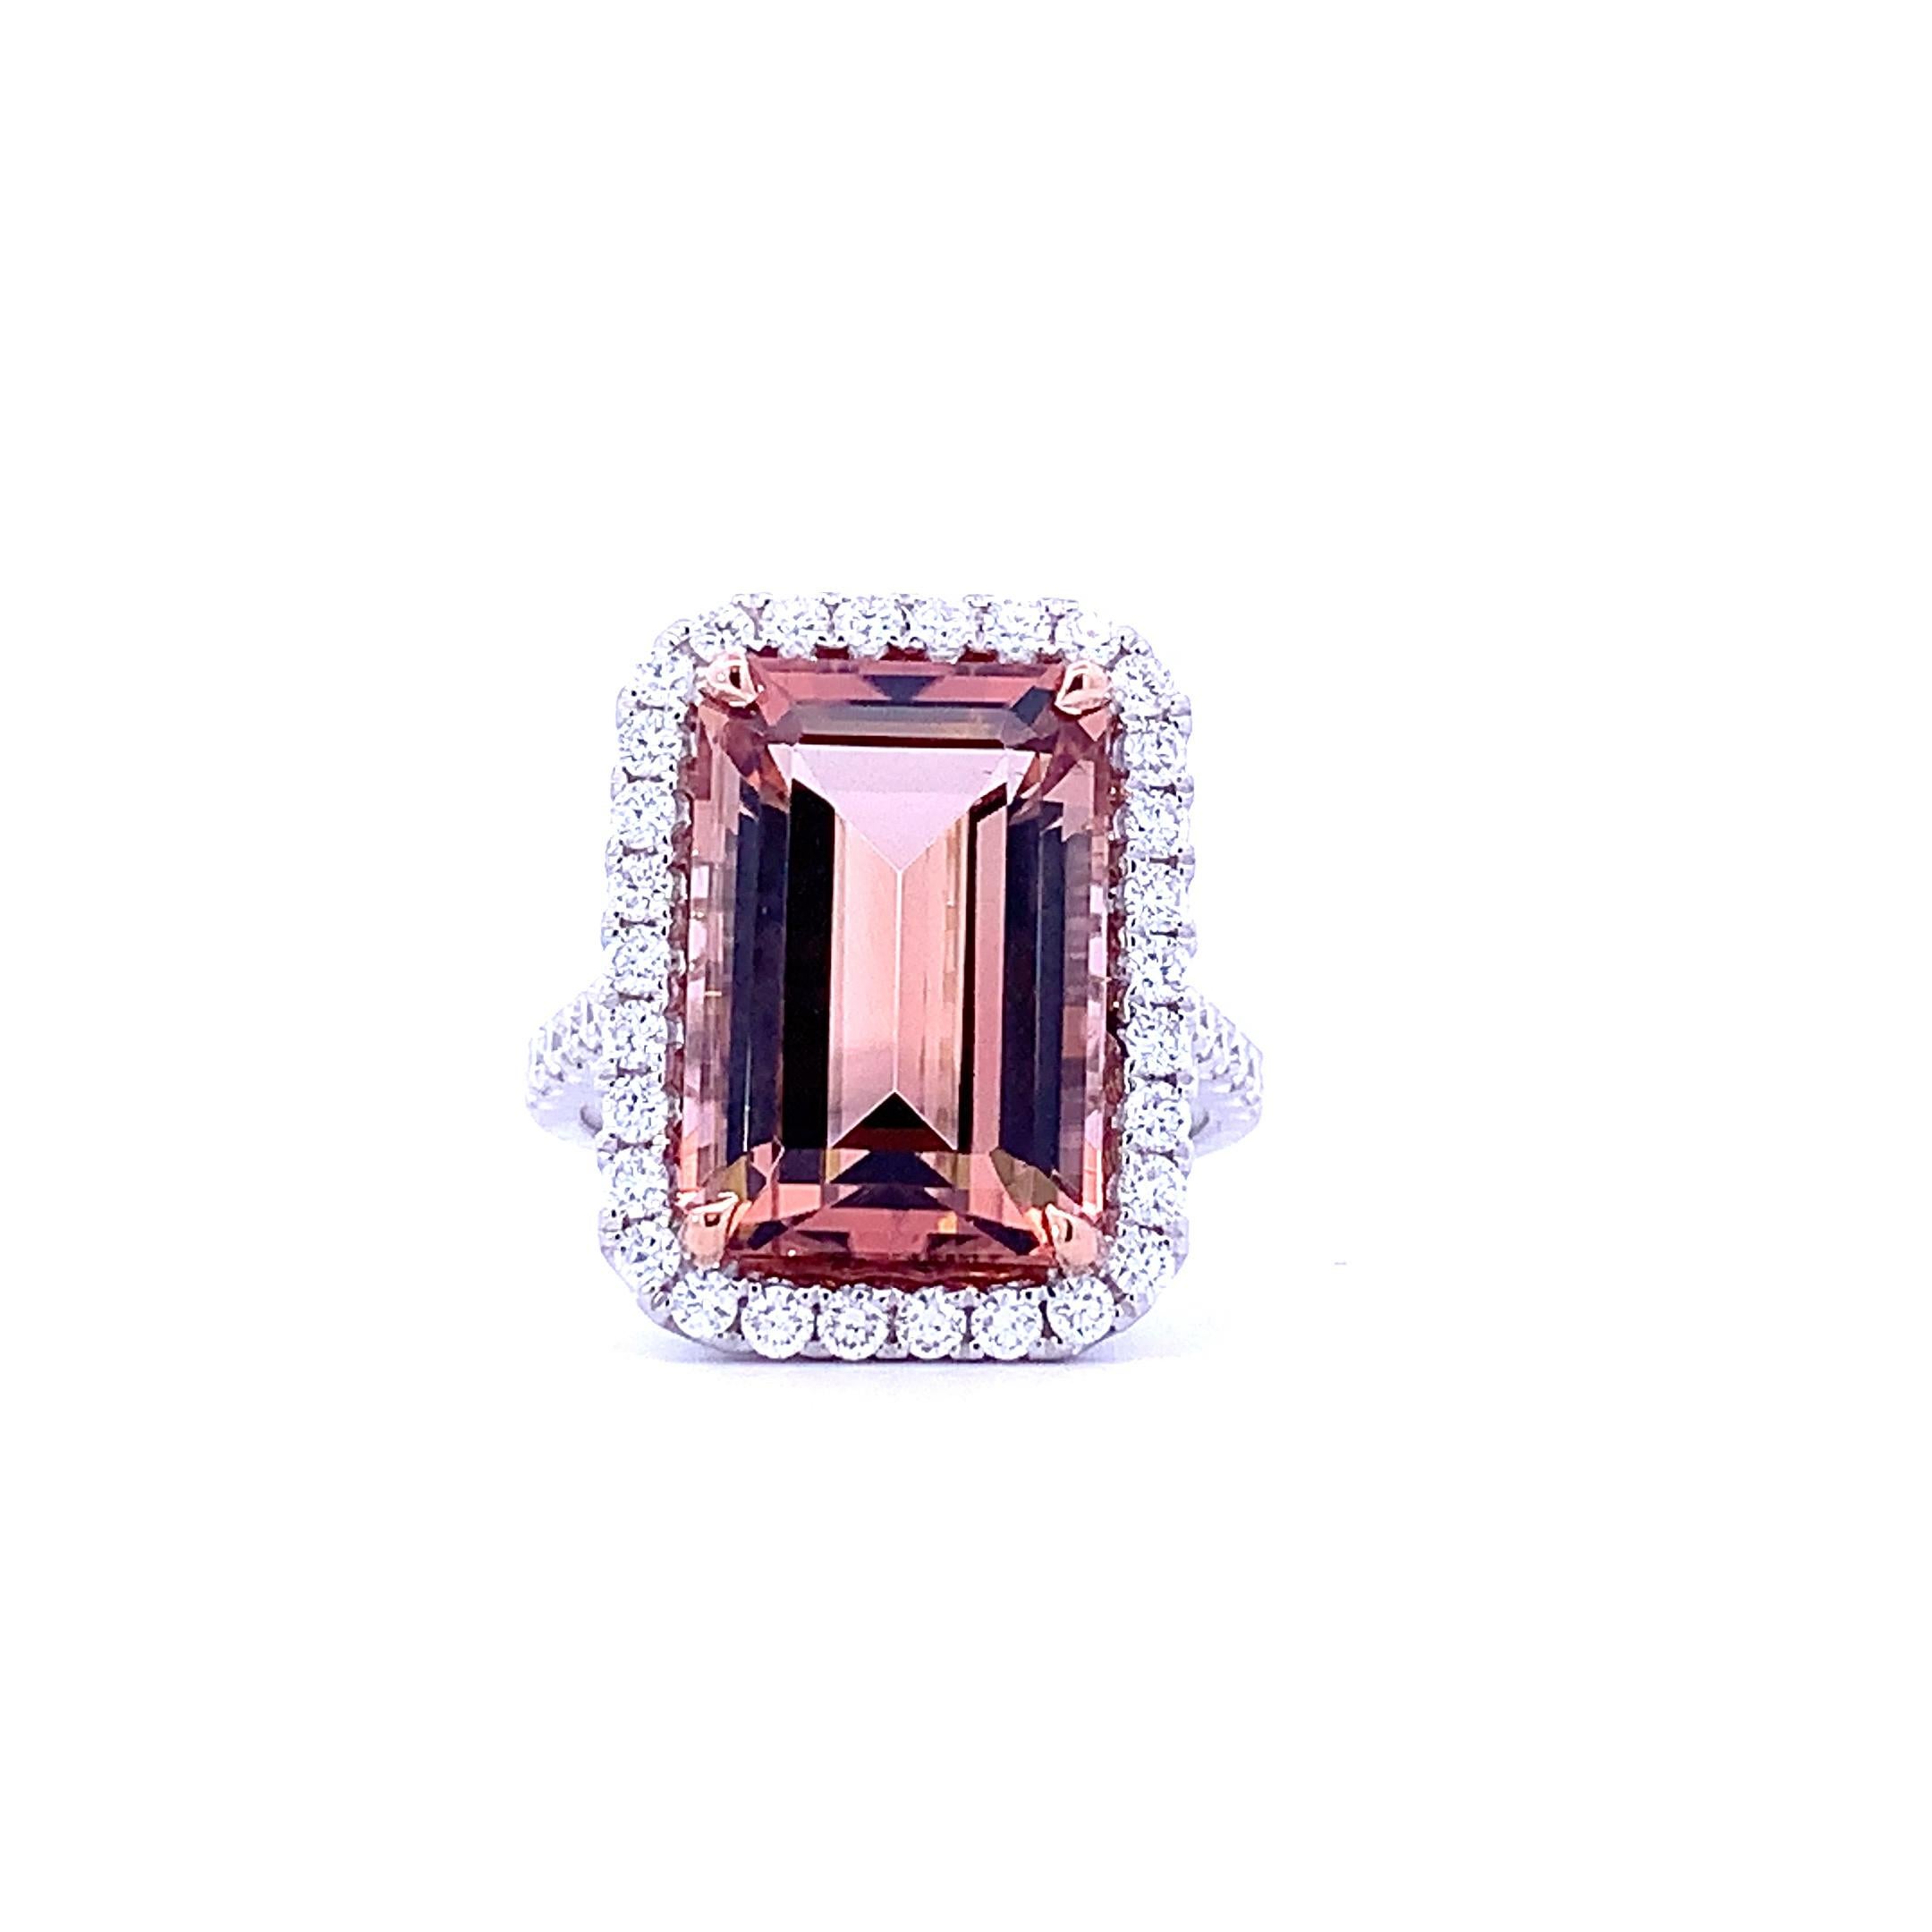 This stunning Cinnamon Tourmaline Halo Ring from the Vendome Collection is a beautiful statement piece. Crafted in 18k White Gold, it features a 9.63 Carat Emerald Cut Pink Tourmaline, surrounded by 0.90 carat of Diamonds. It is the perfect piece to